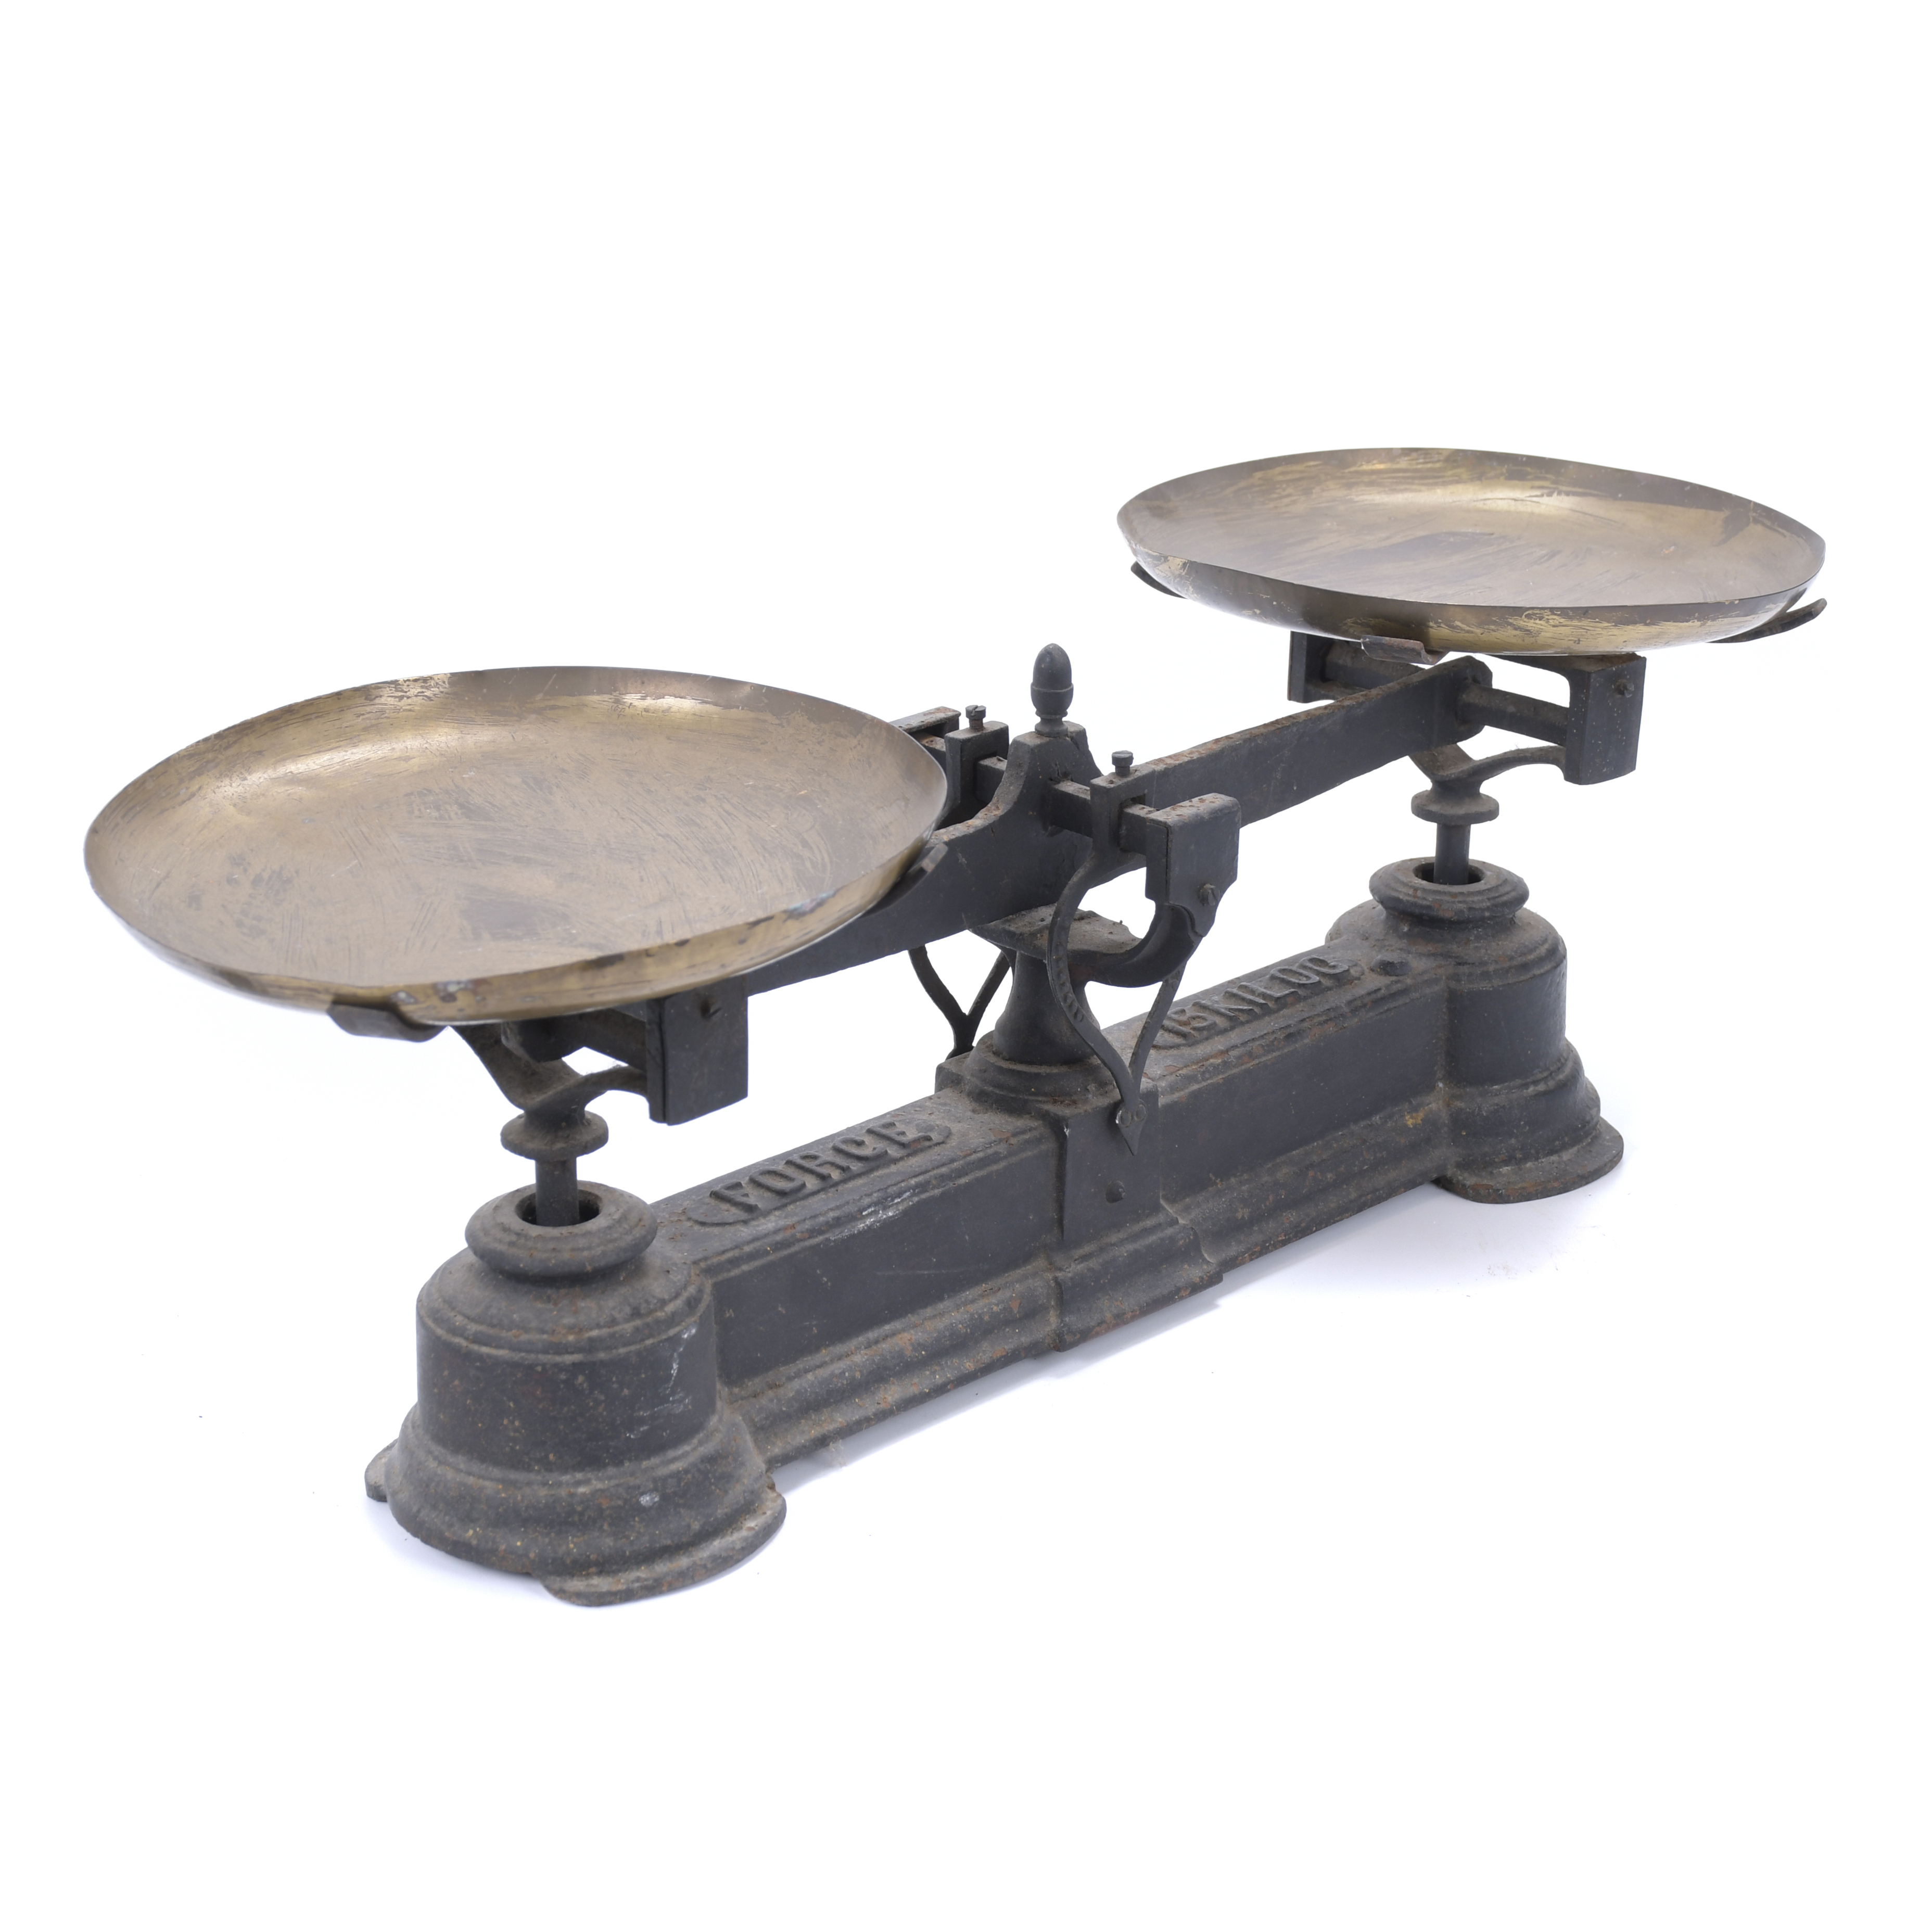 WROUGHT IRON WEIGHT SCALES.